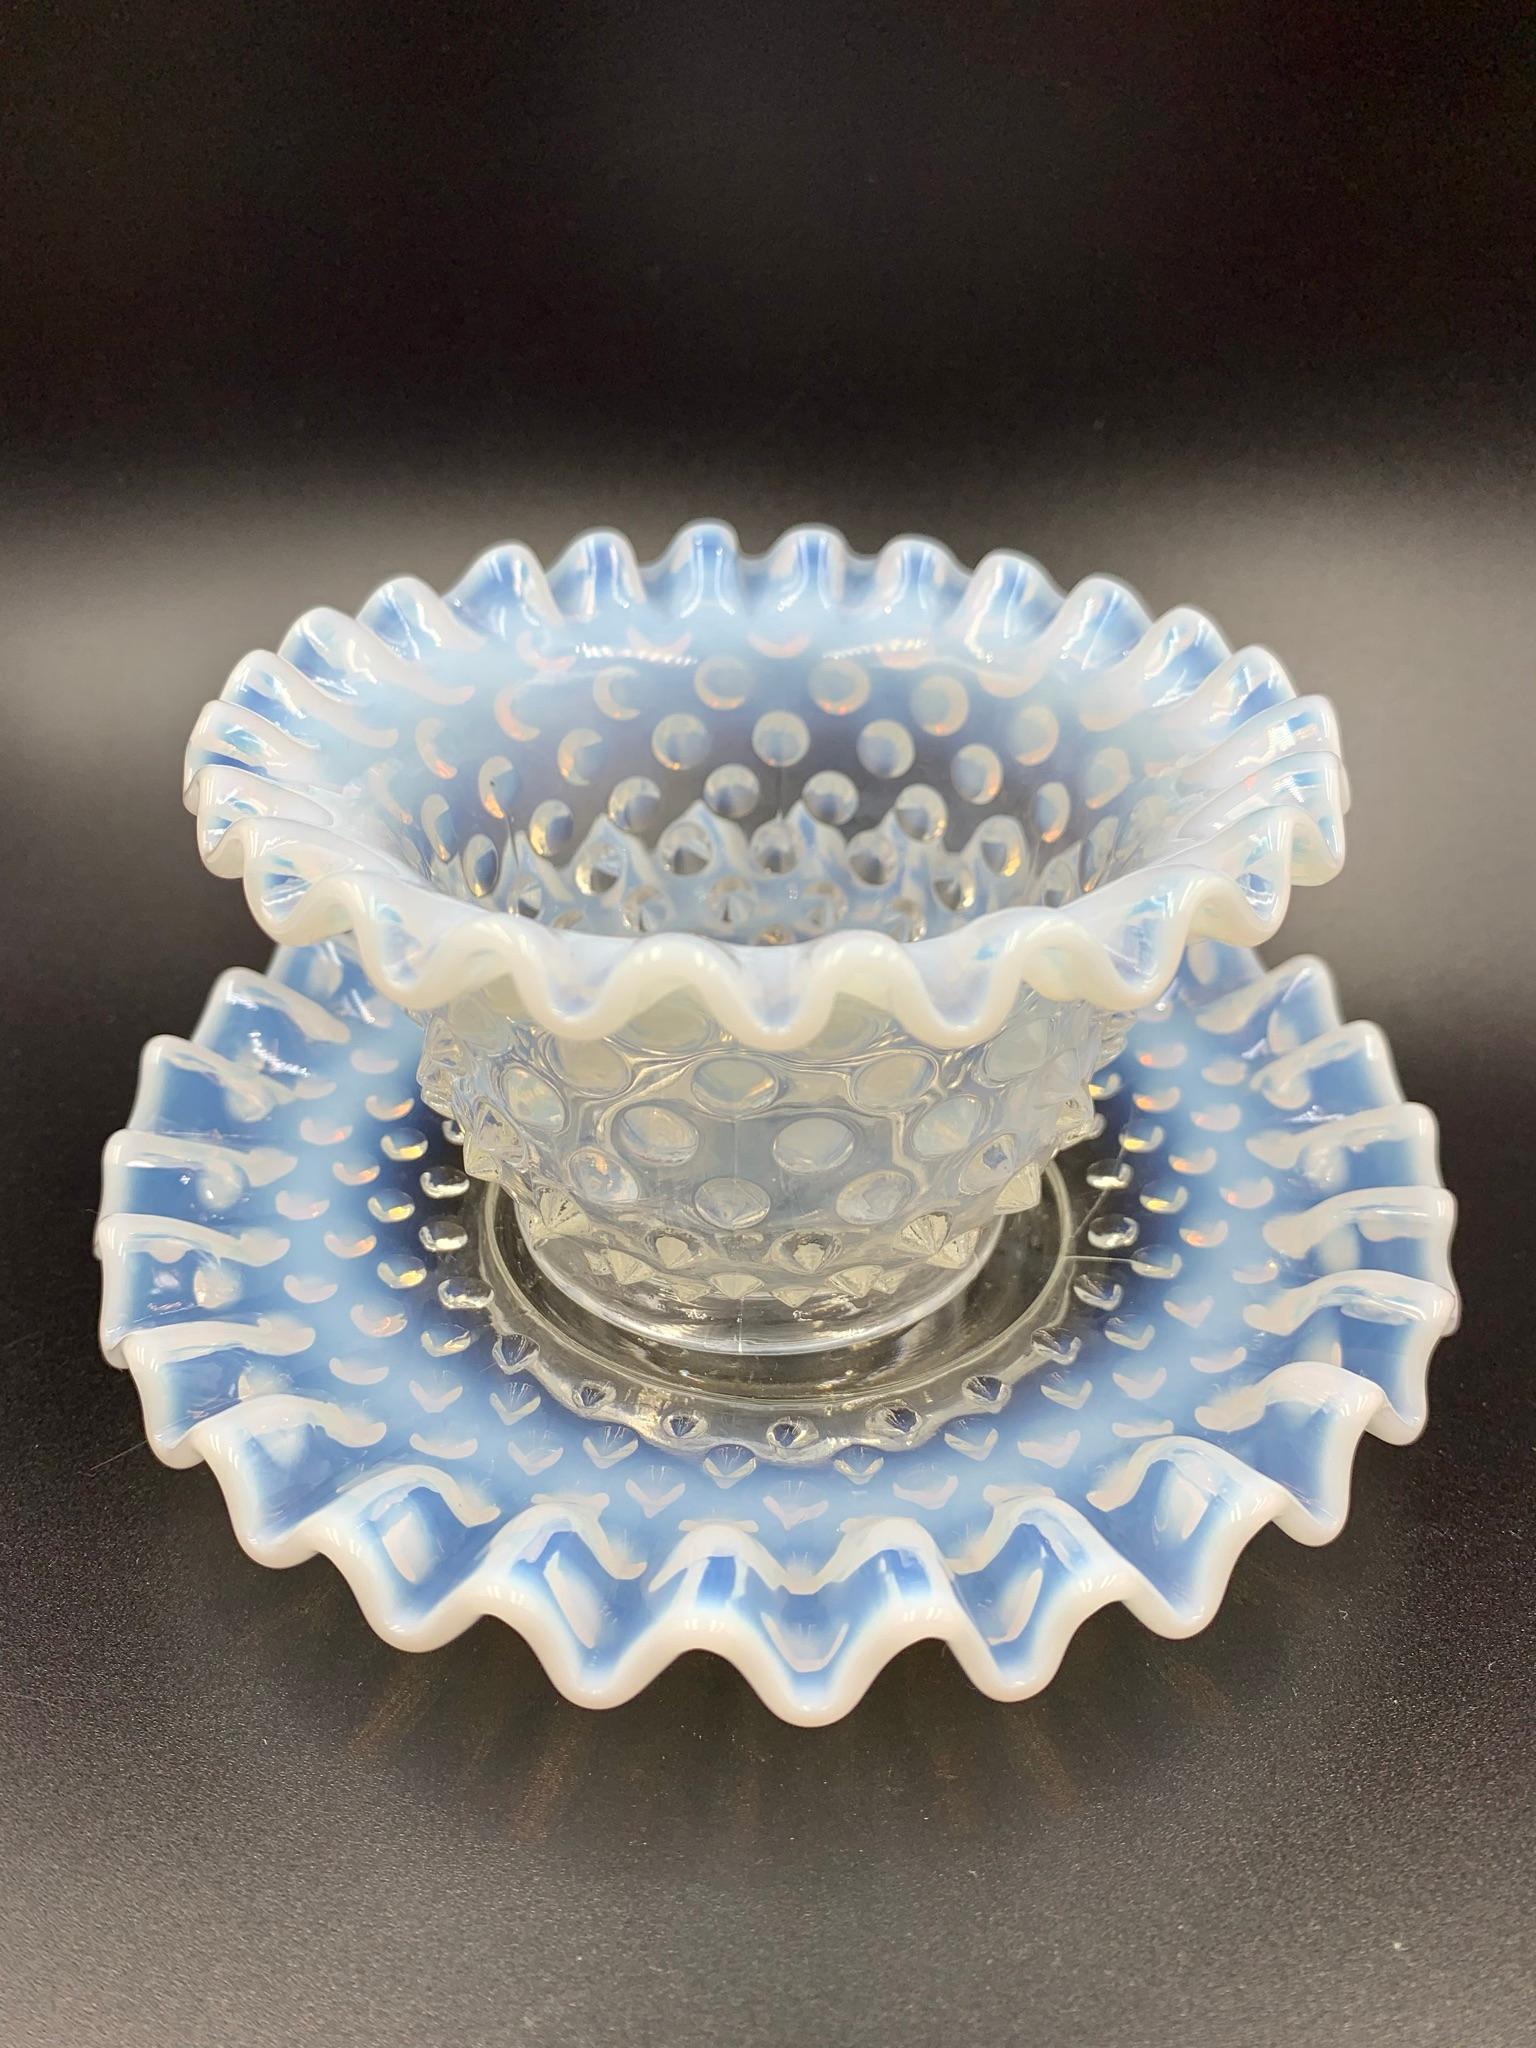 Fenton produced Hobnail from 1939 to 1964, this collection includes 12 sets of mayonnaise bowls and underplates in a light blue opalescent color. This set would be great to serve fruit, ice cream or custard. These pieces have seams as seen in the